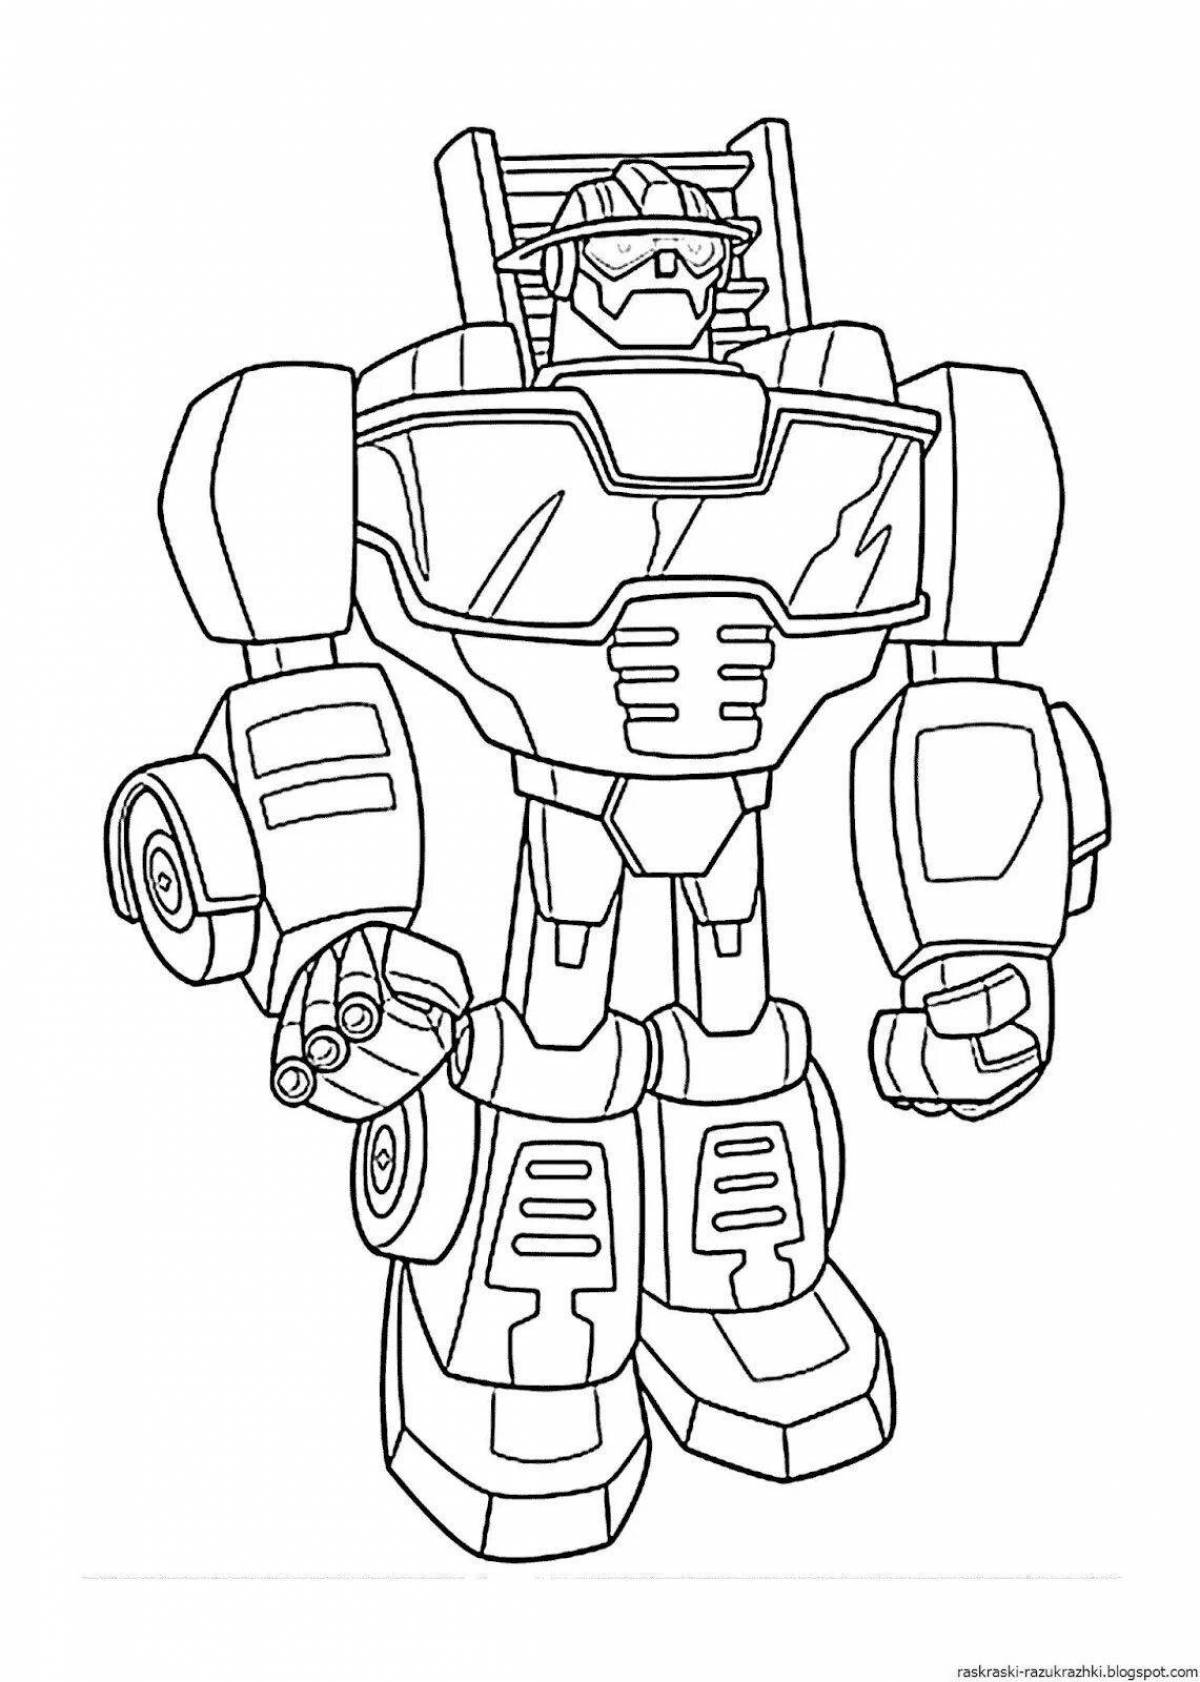 Gorgeous fire robot coloring page